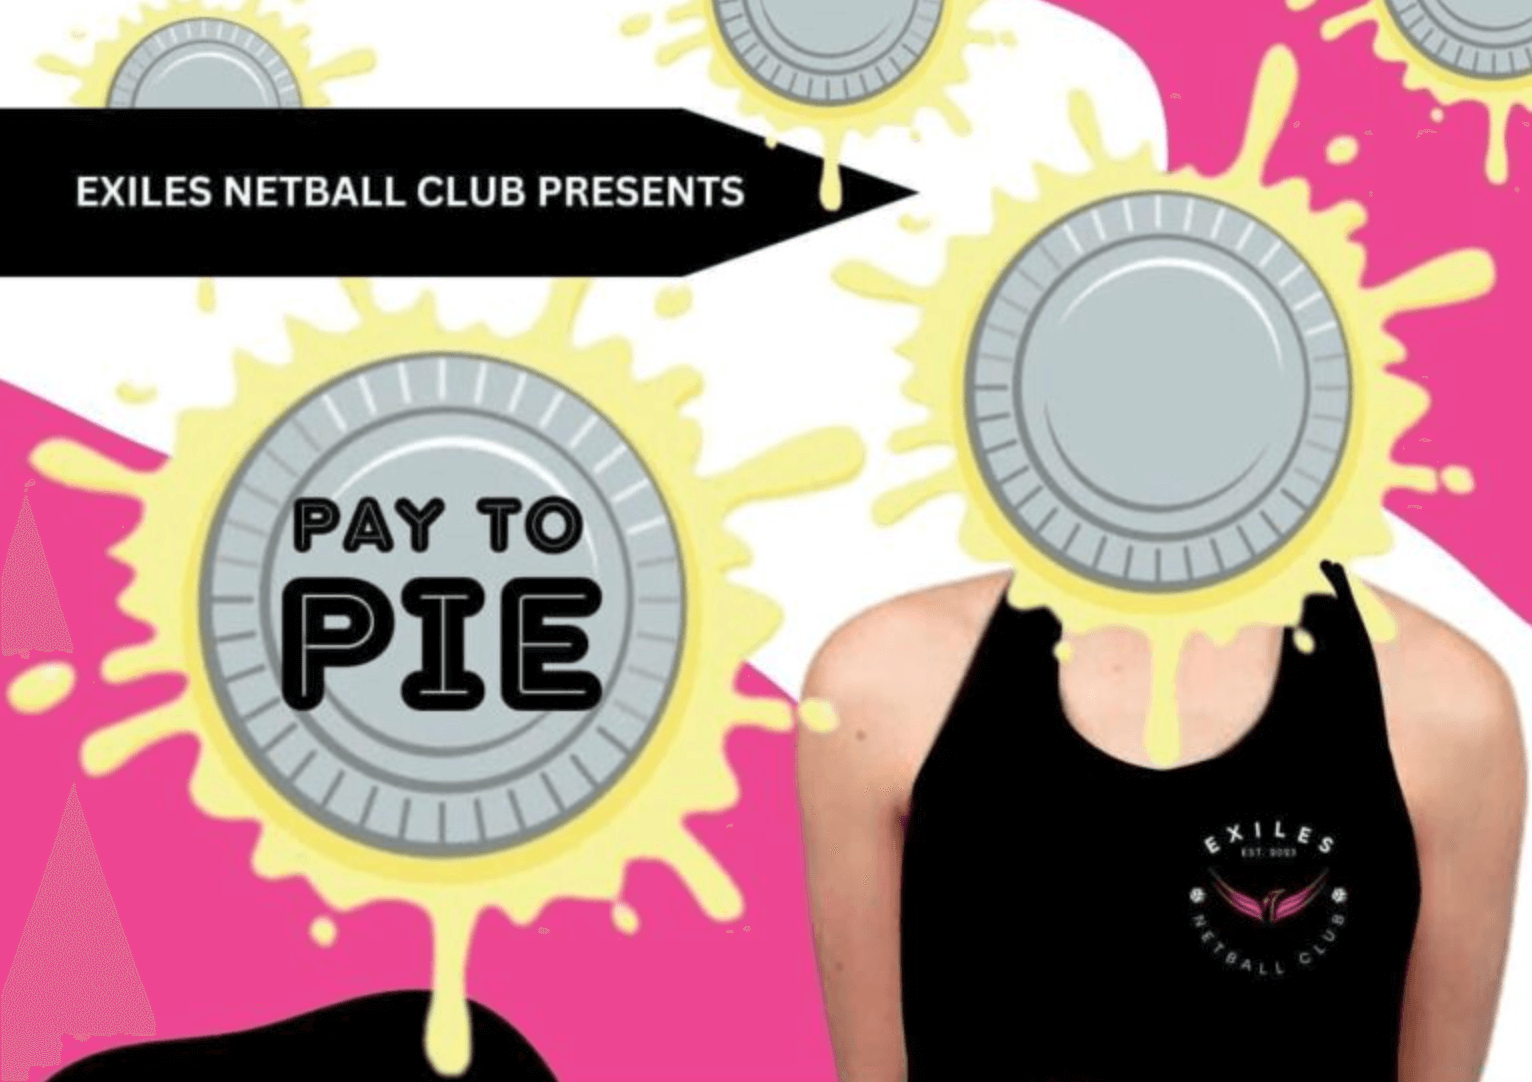 a poster for pie in the face competition